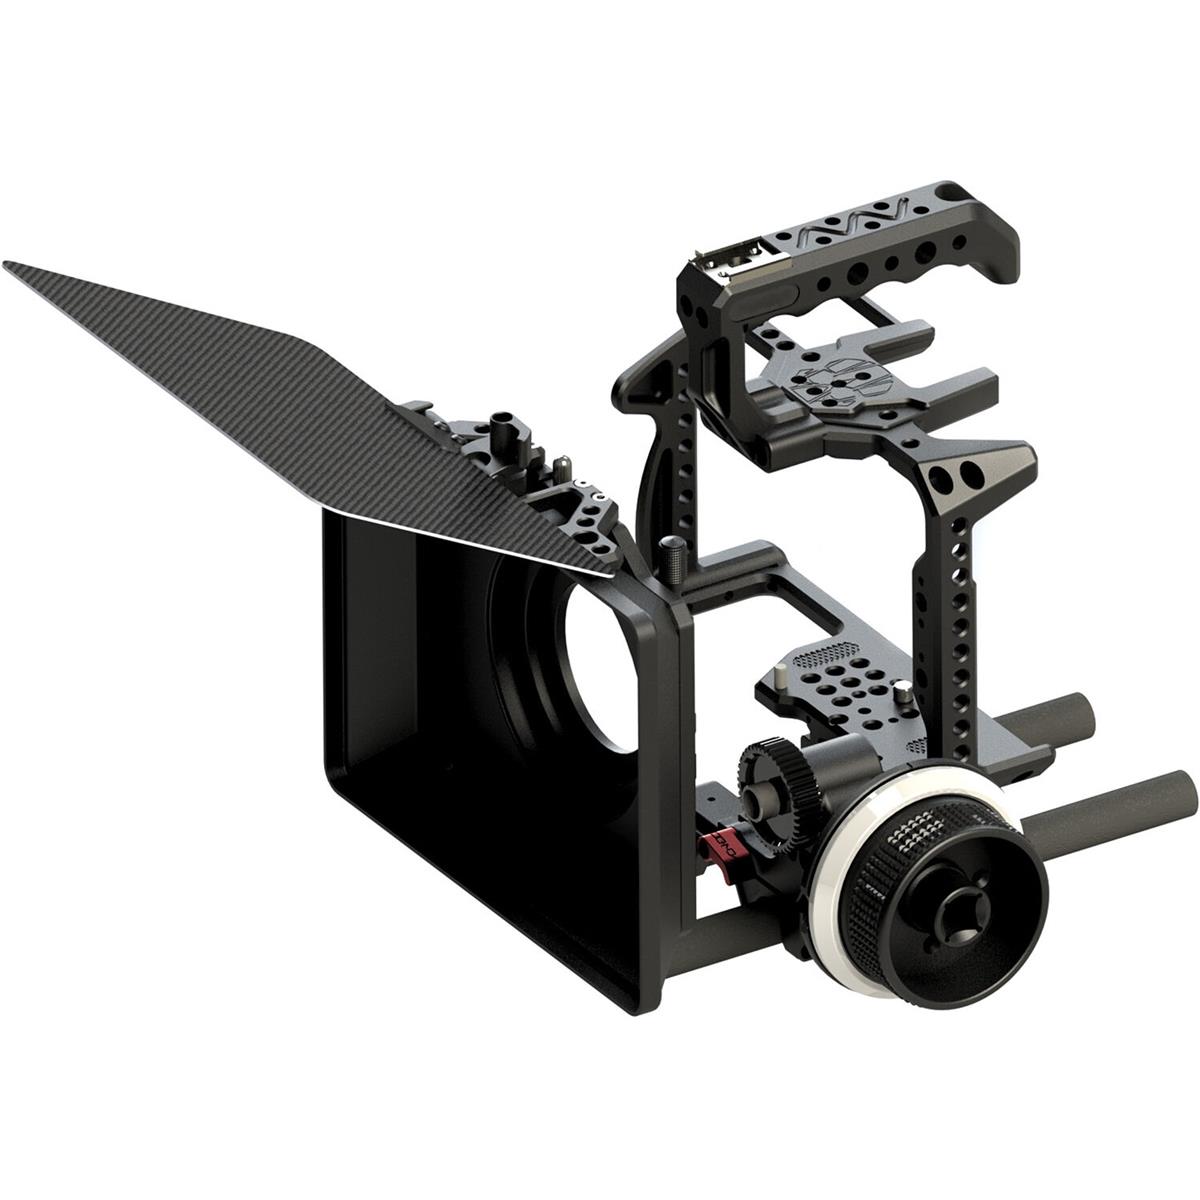 Image of Came-TV Z Panasonic Lumix DC-S1H Rig with Carbon Fiber Flag Package